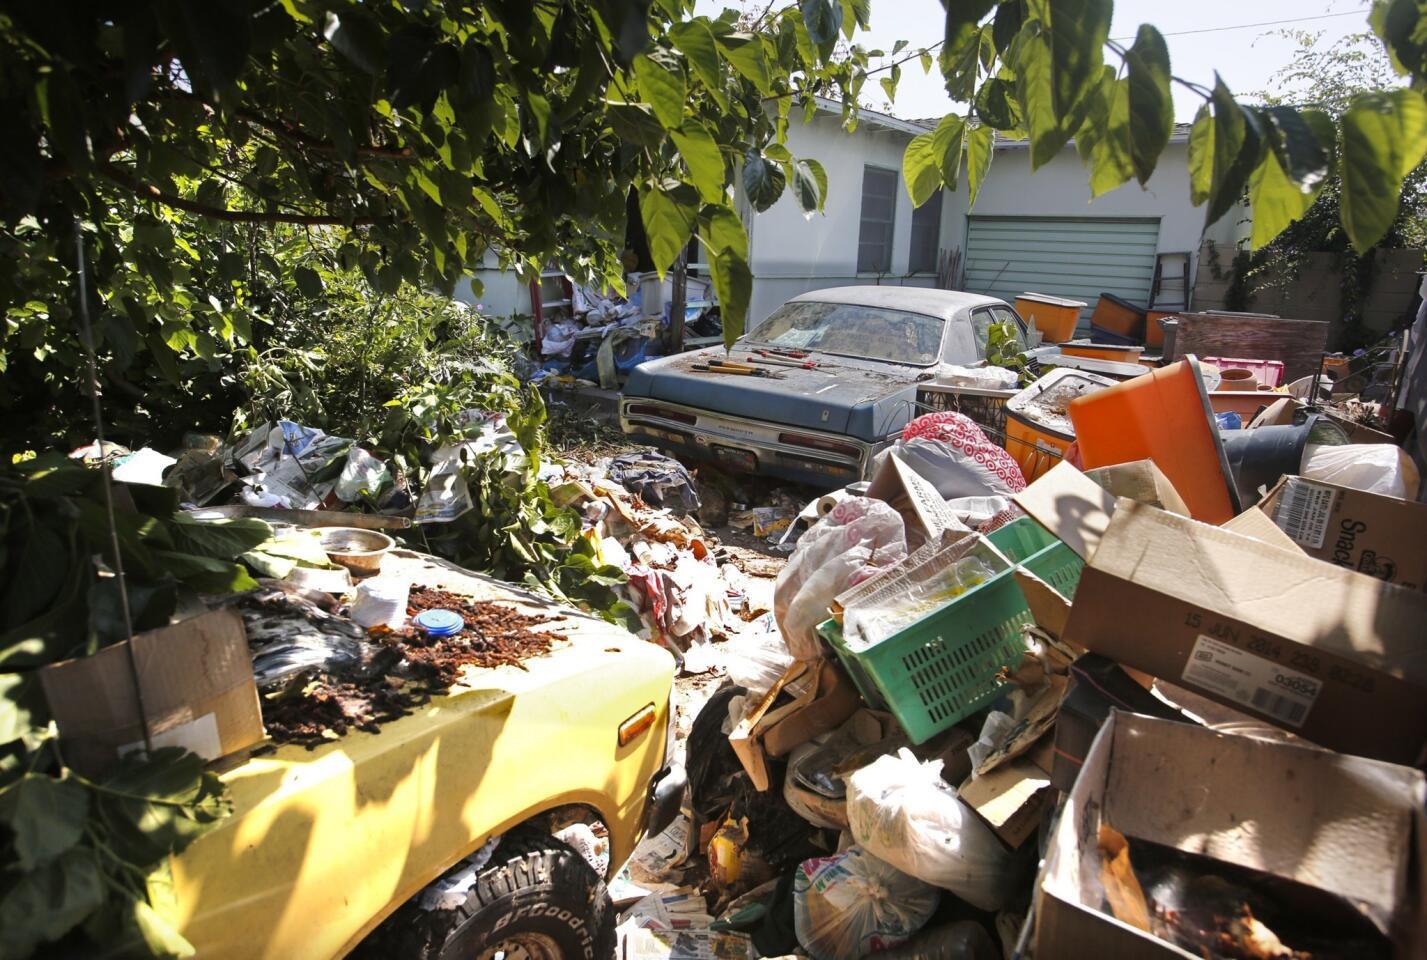 Trash and vehicles fill the frontyard of a house on Rosewood Street in Santa Ana. A woman was found dead Tuesday on the front porch of the house, and more than 40 stray cats were discovered meandering around the property.